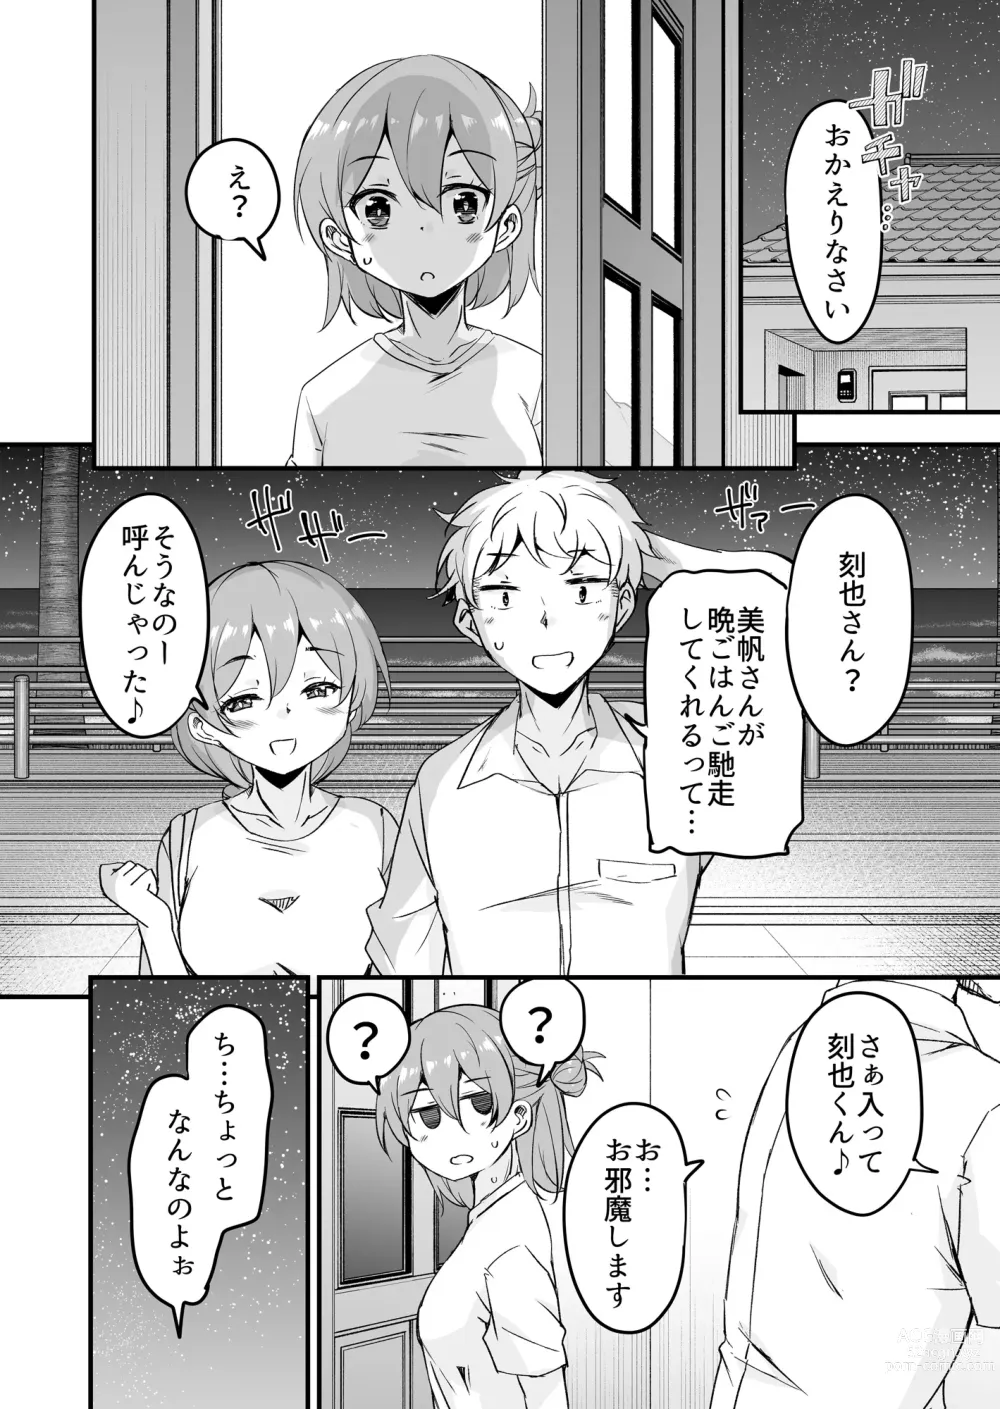 Page 28 of doujinshi 人妻店長〜娘の彼氏お借りします〜